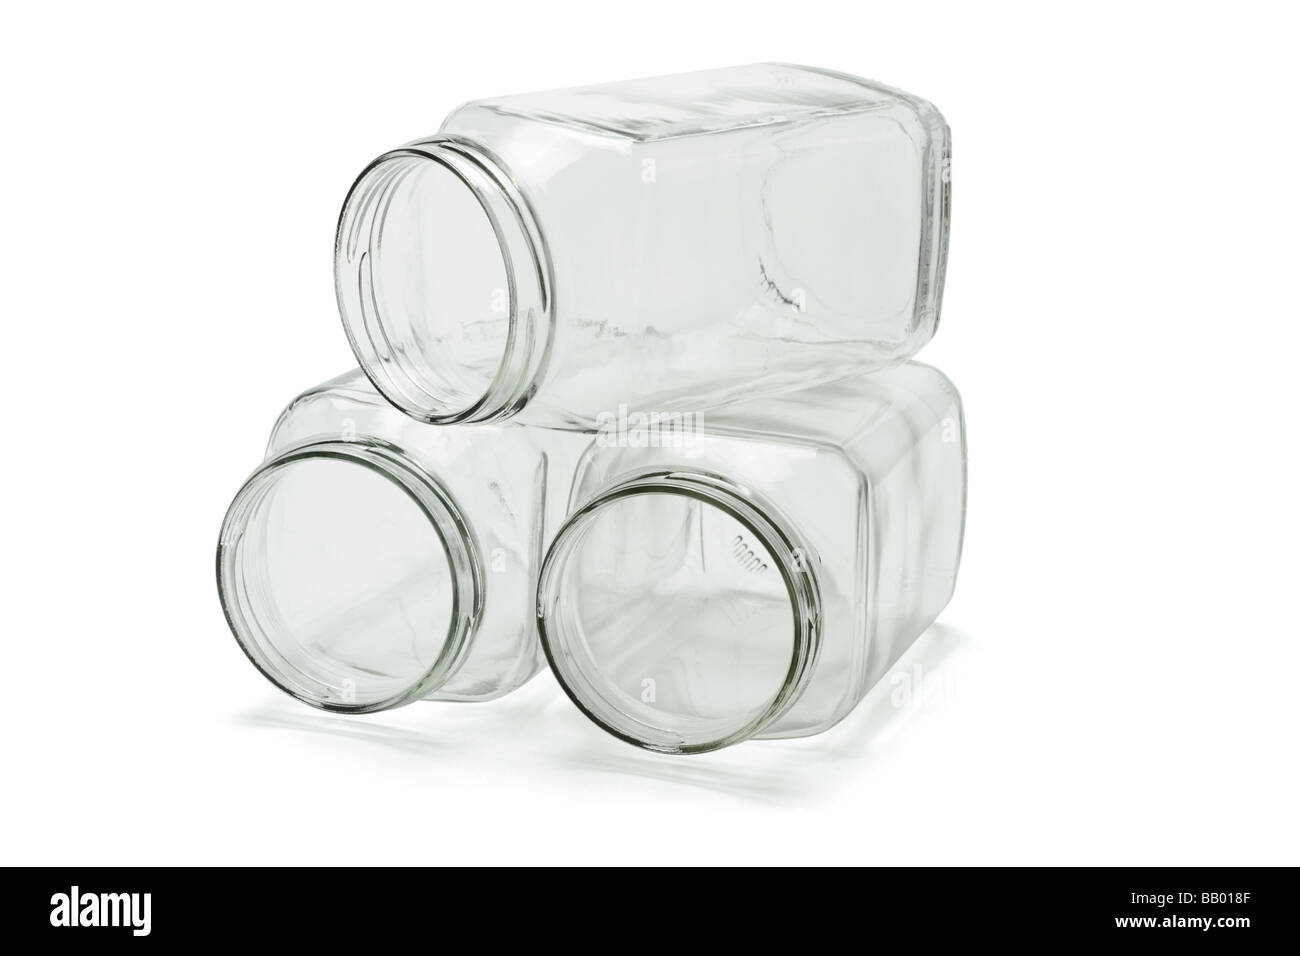 Three open glass jars stacked on white background Stock Photo